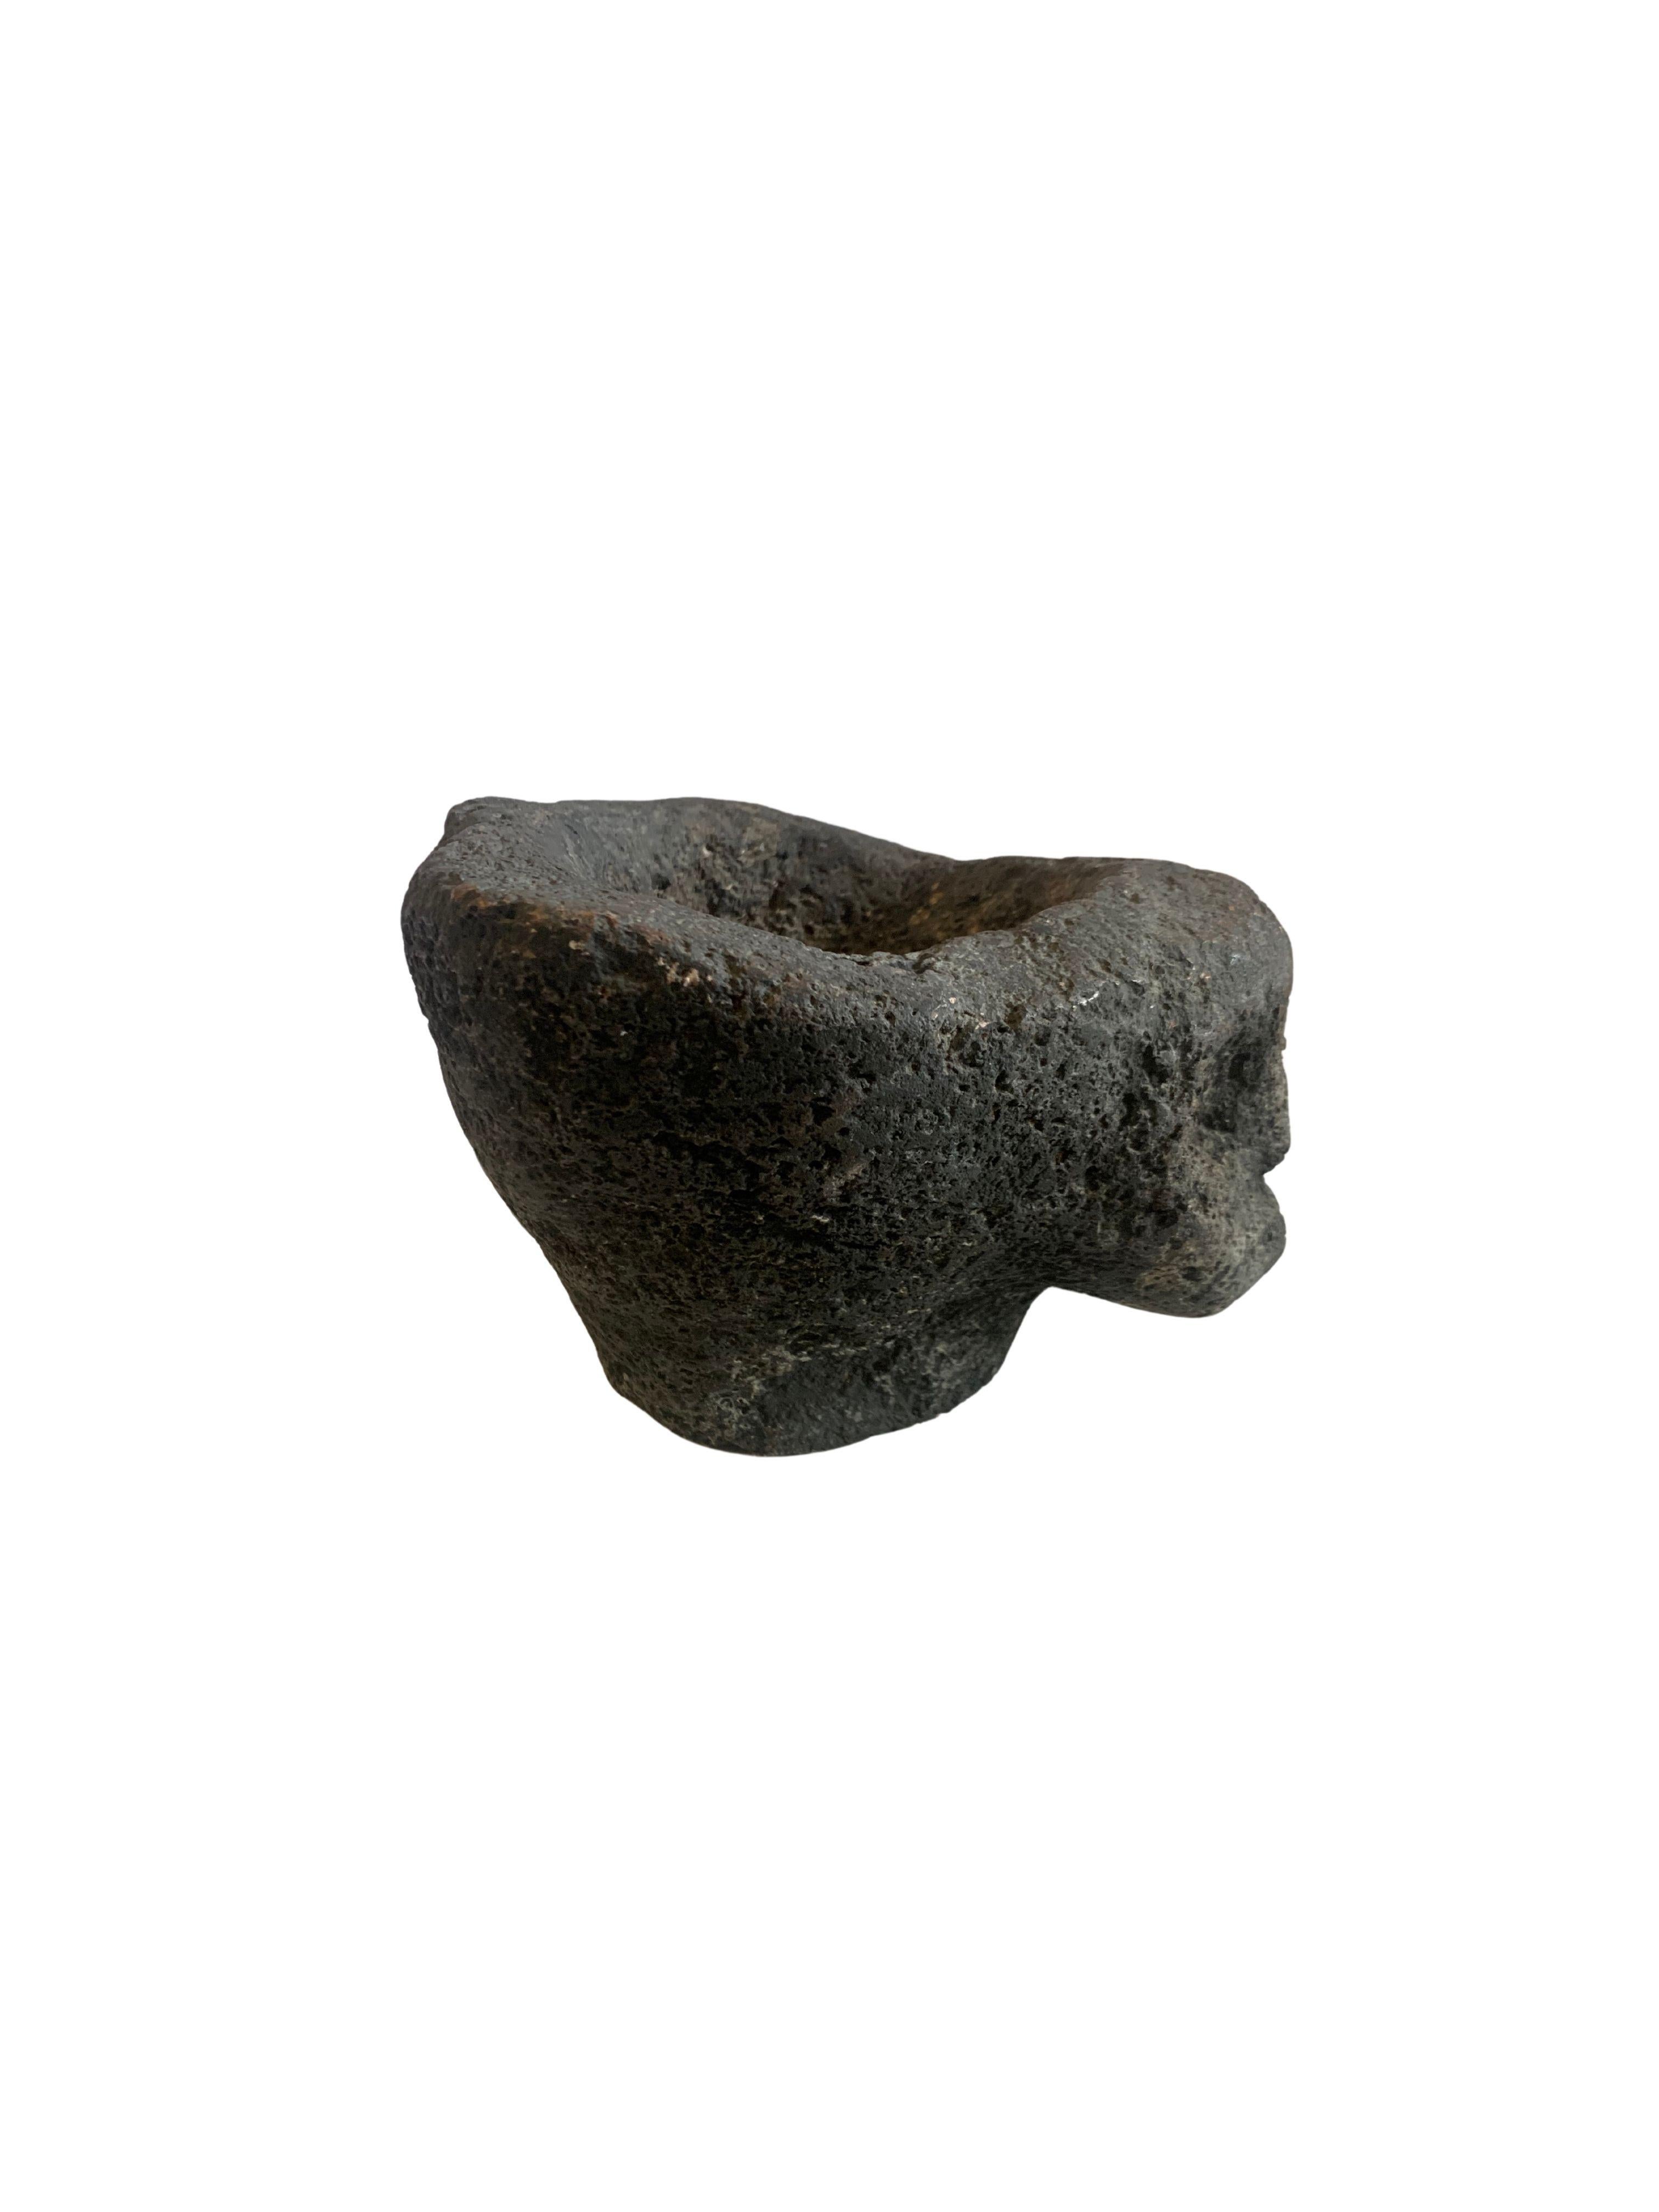 Organic Modern Antique Solid Stone Spice Mortar From Java, Indonesia, with Carved Face